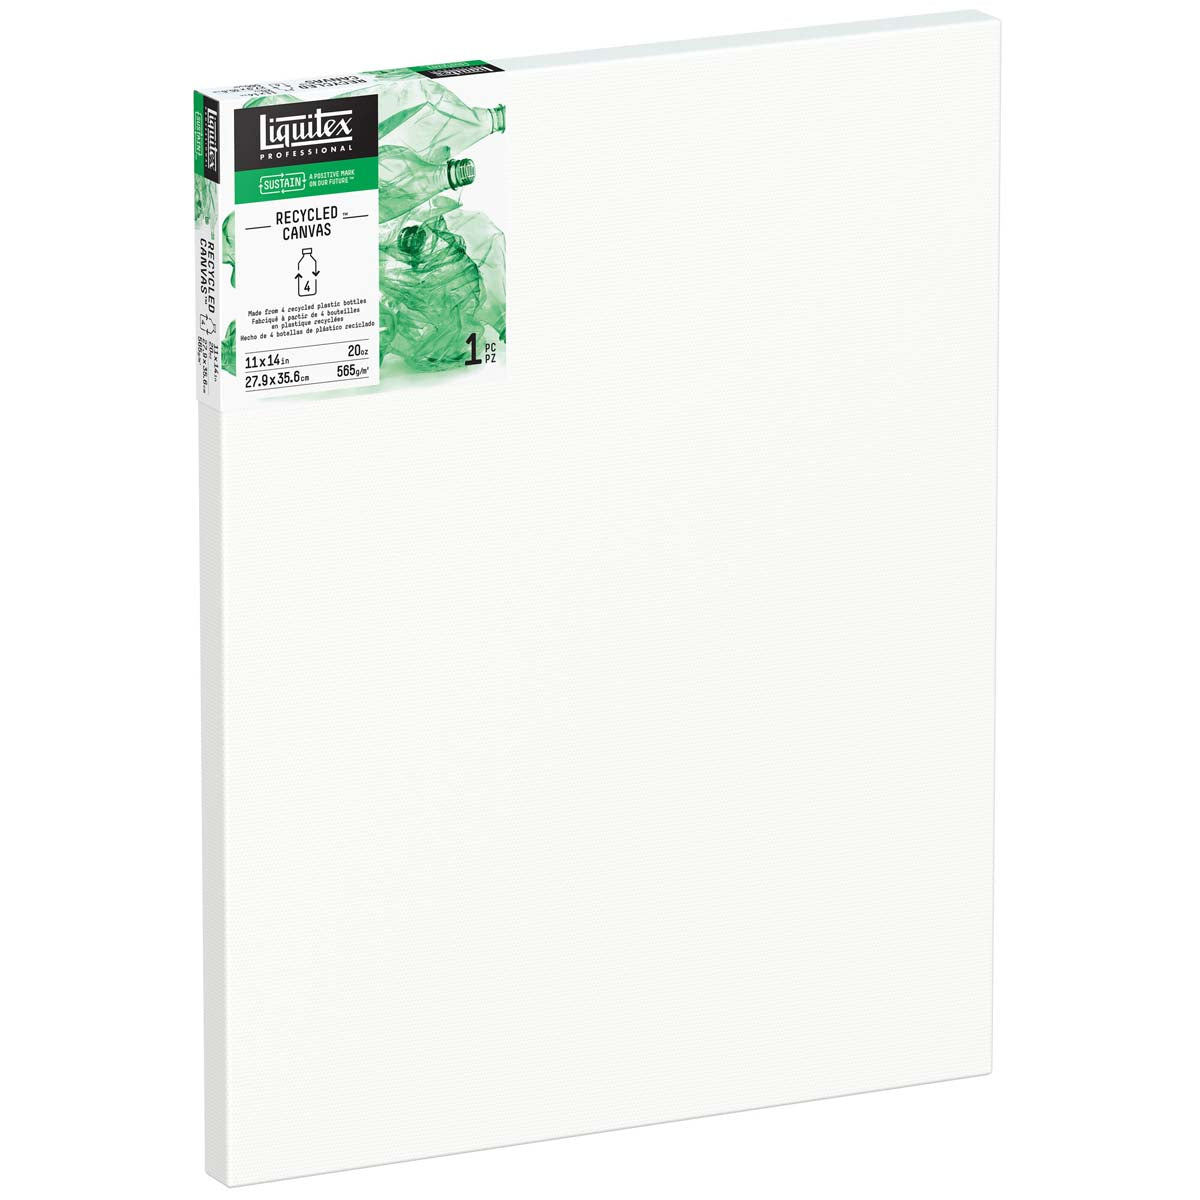 Liquitex Recycled Canvas - Standard Edge - 11x14 inches - 28x35cm